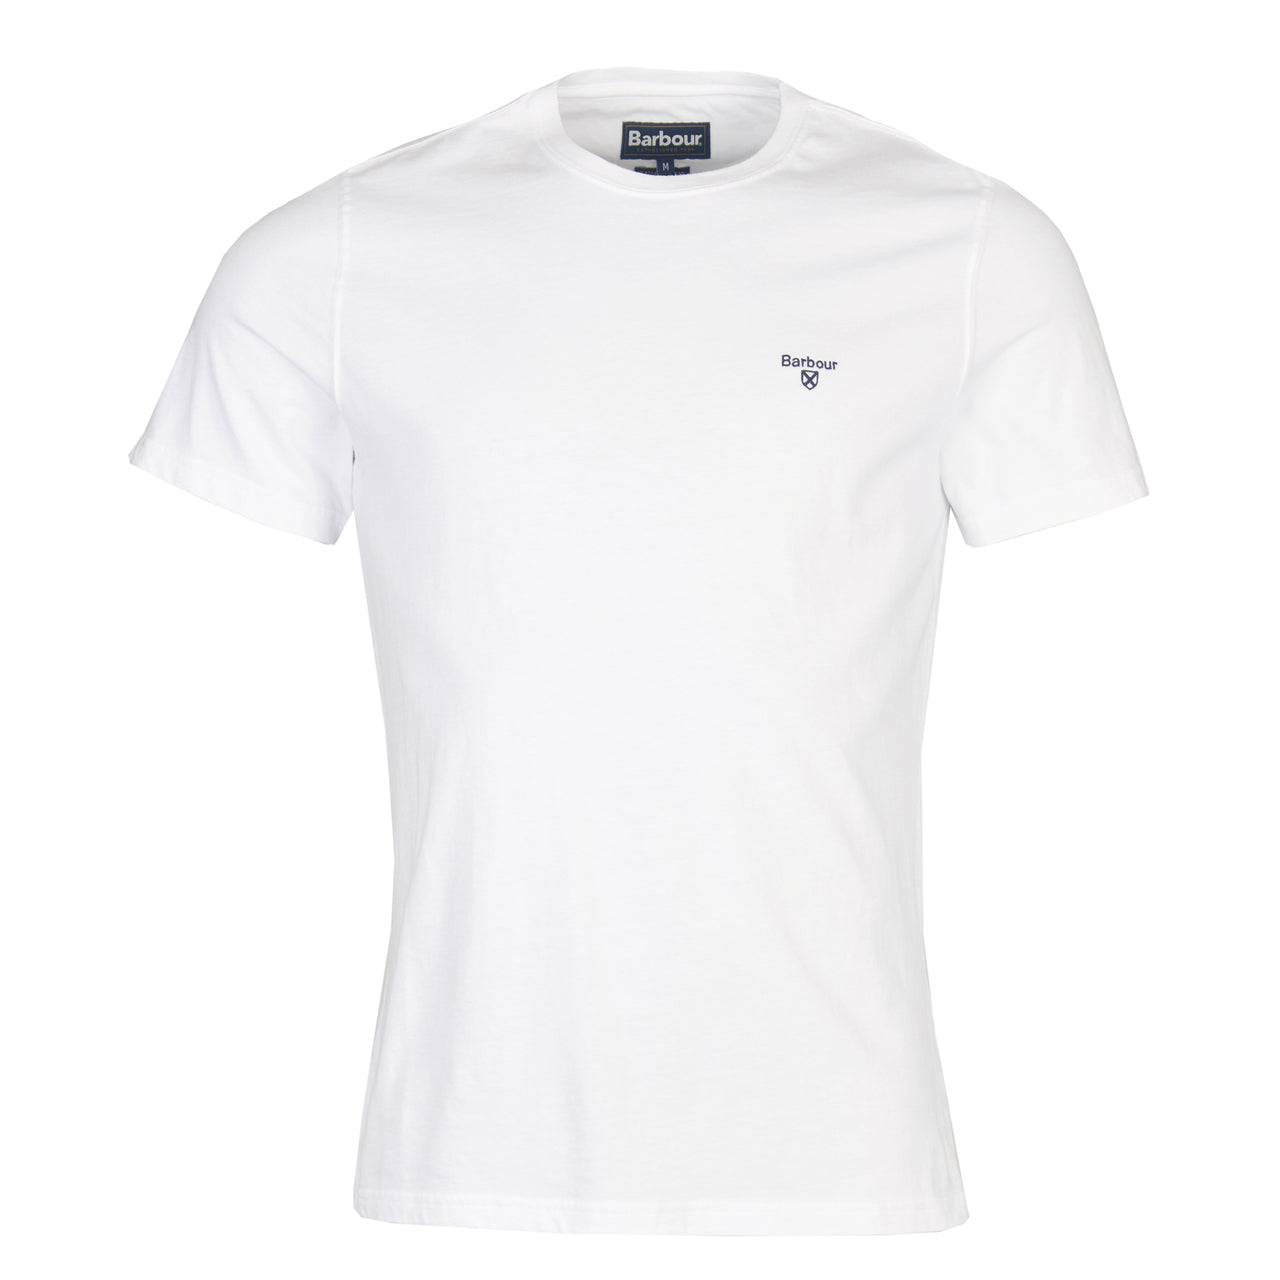 Barbour Essential Sports T-Shirt - White